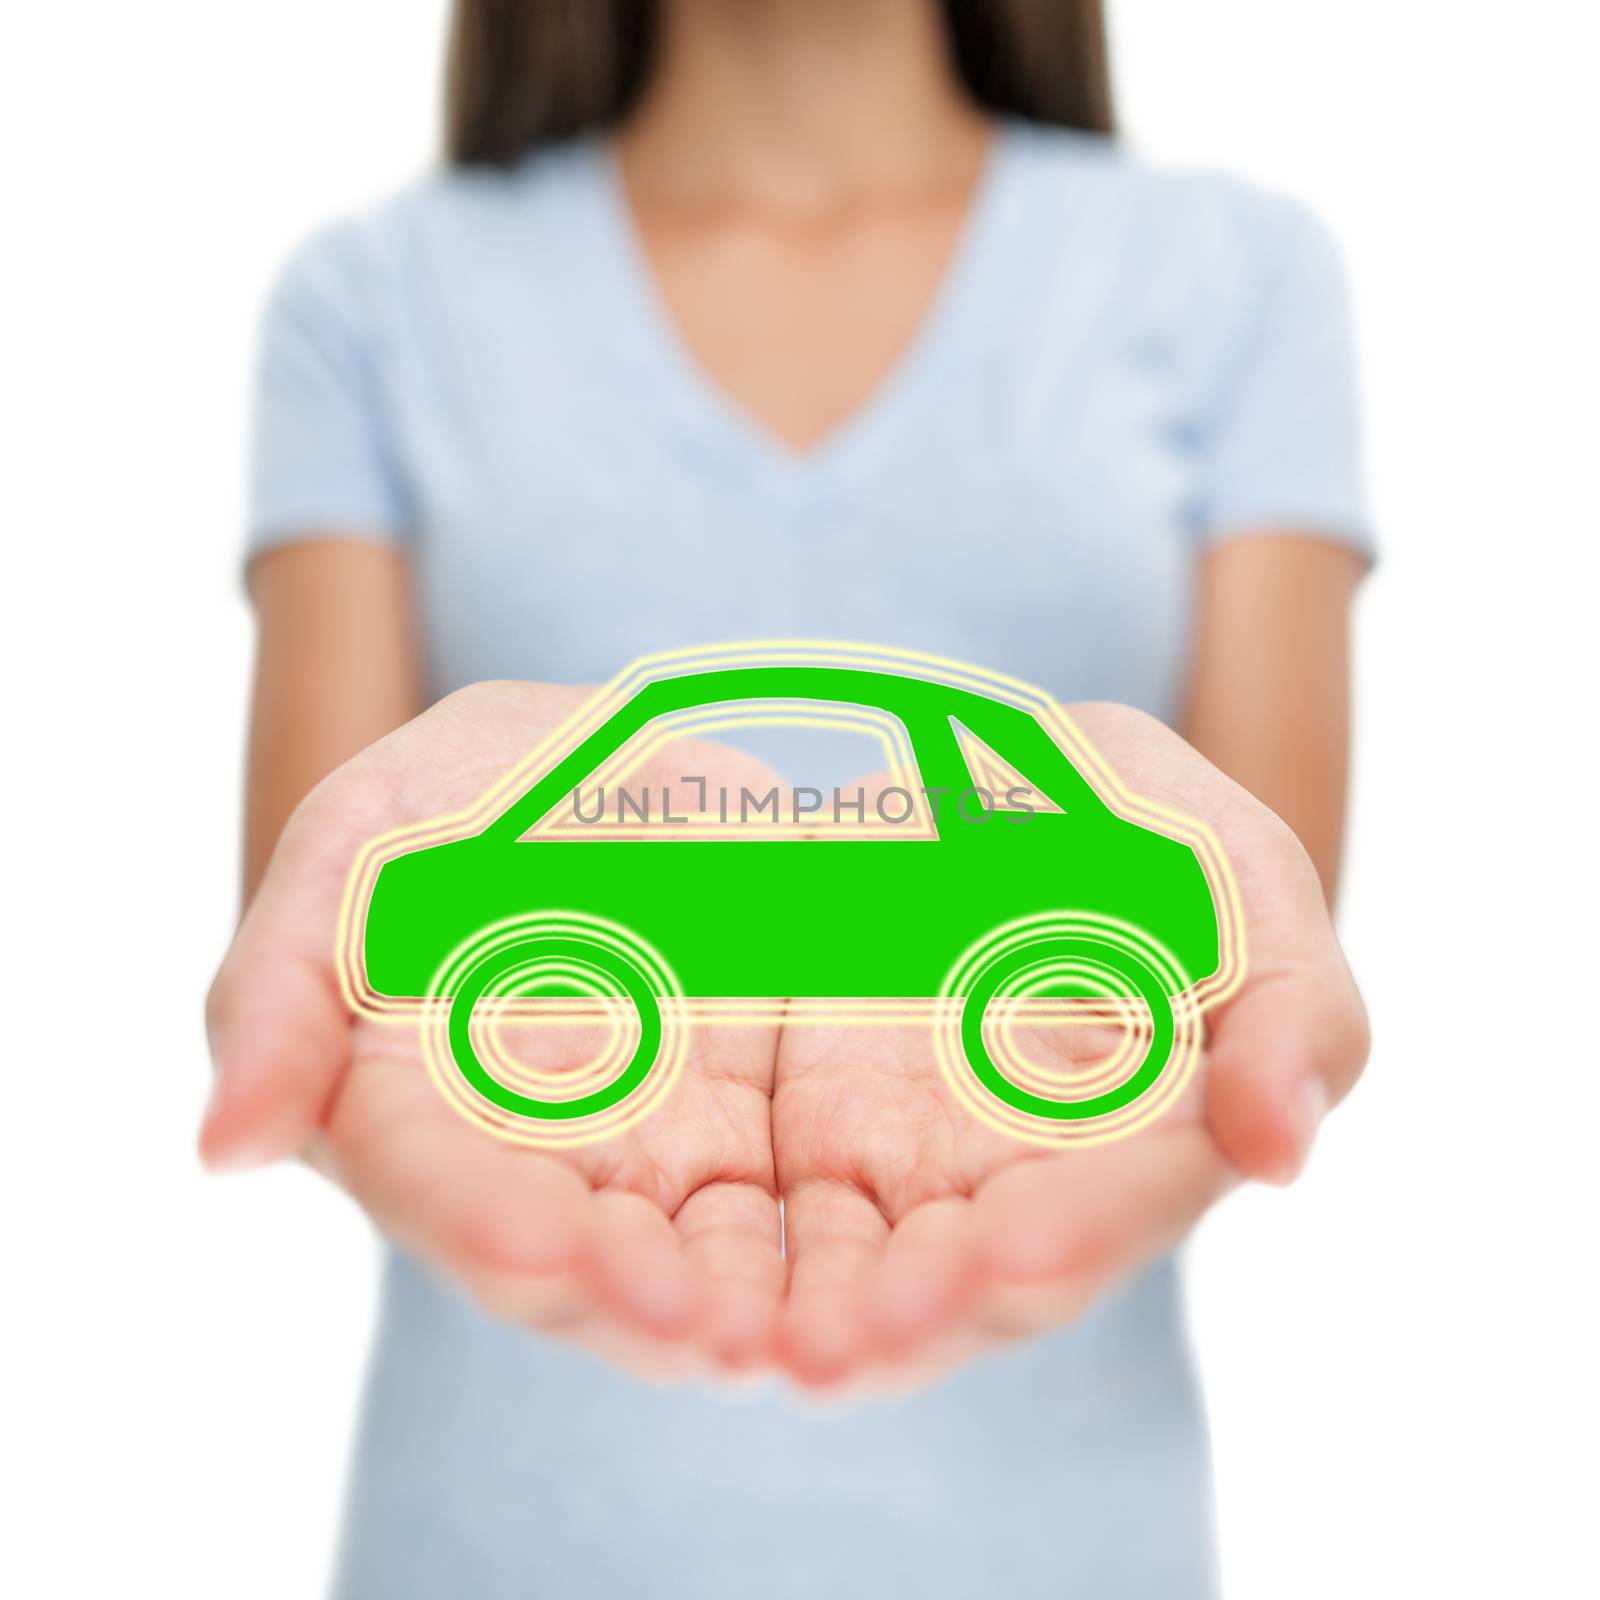 Green car insurance woman showing open hands. Eco friendly environment electric hybrid auto insurance concept.